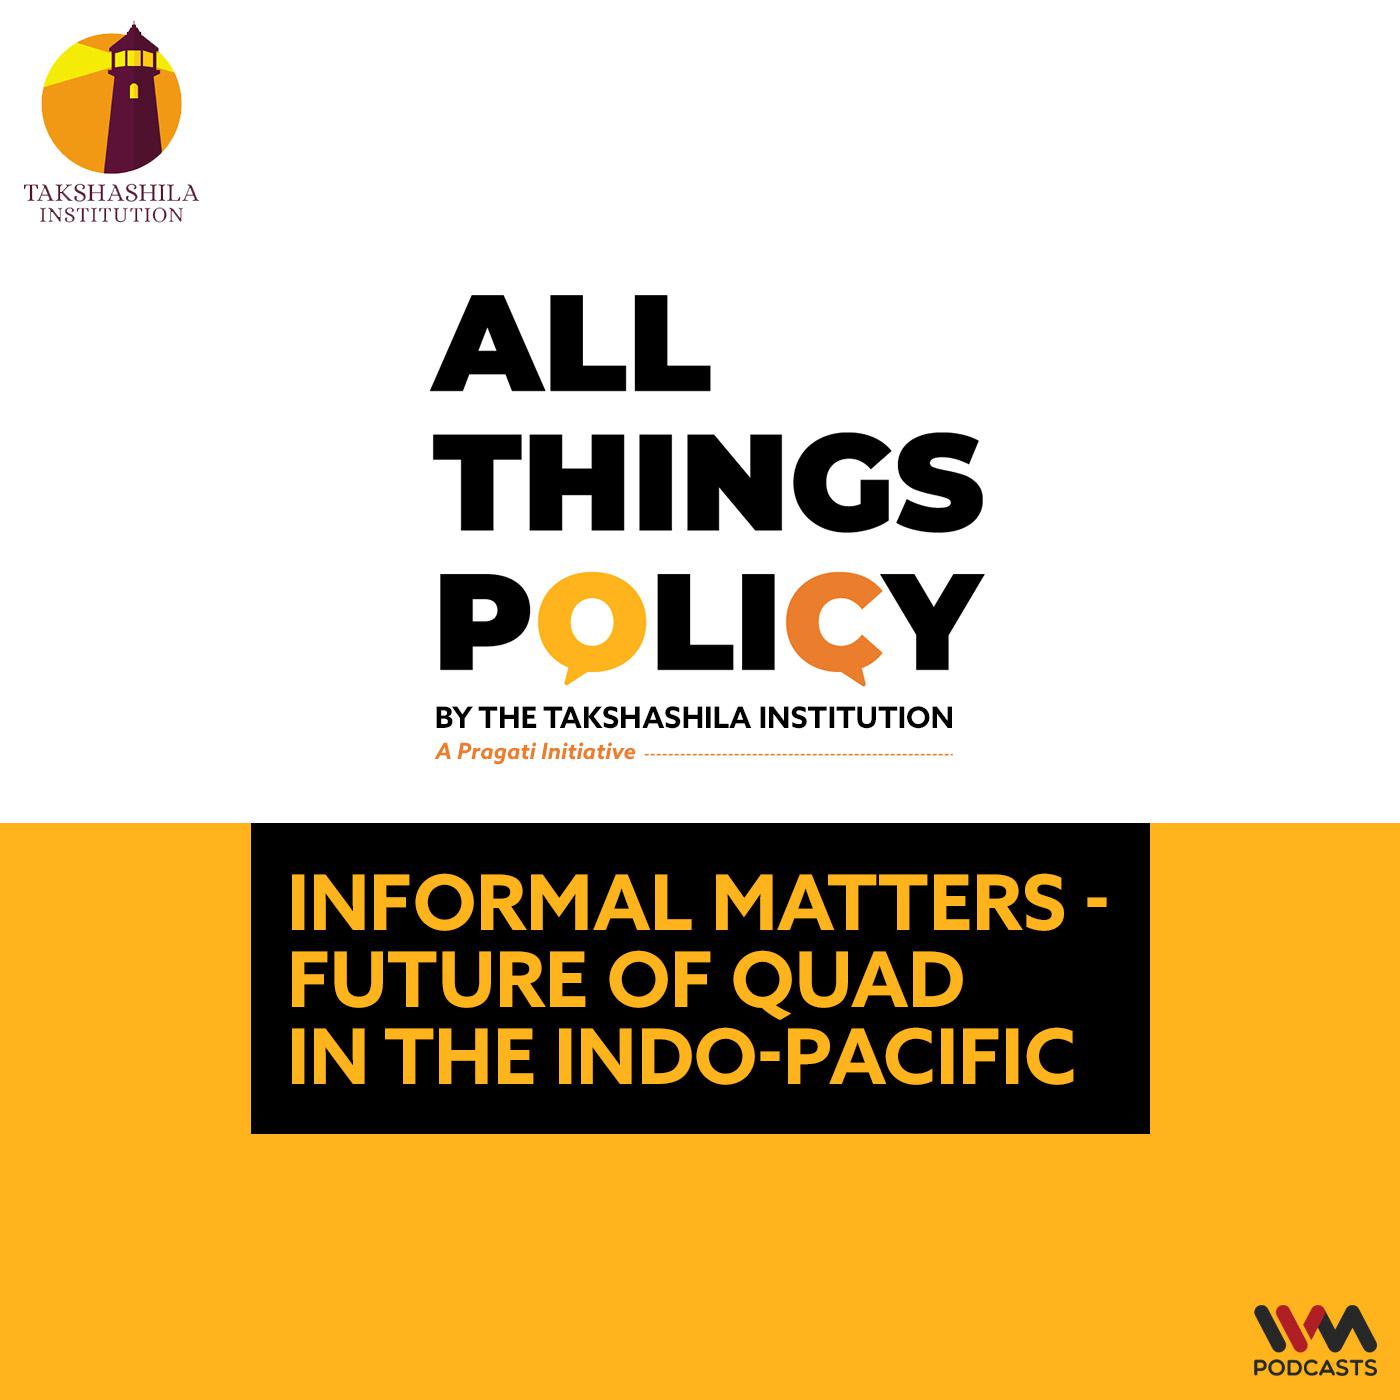 Informal Matters - Future of Quad in the Indo-Pacific